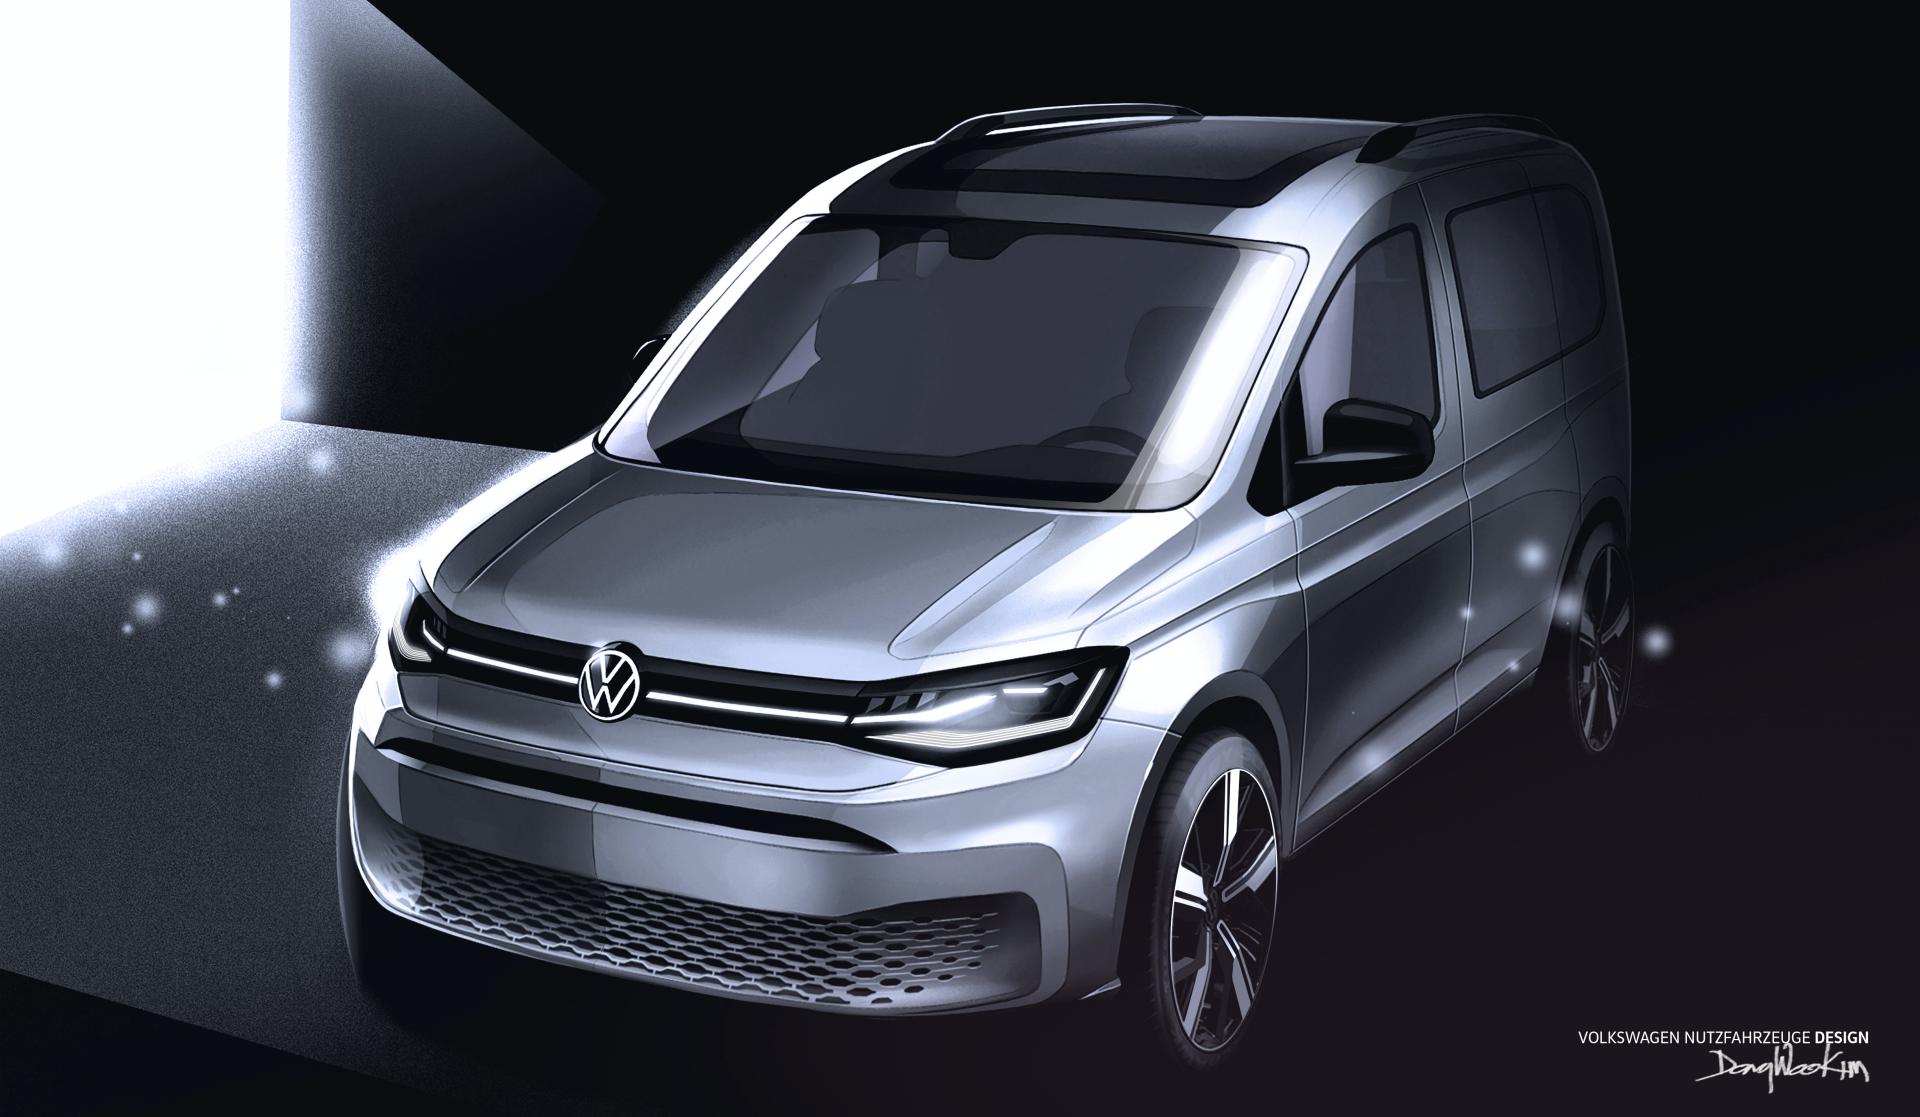 New VW Caddy Previewed In More Realistic Sketches Ahead Of February